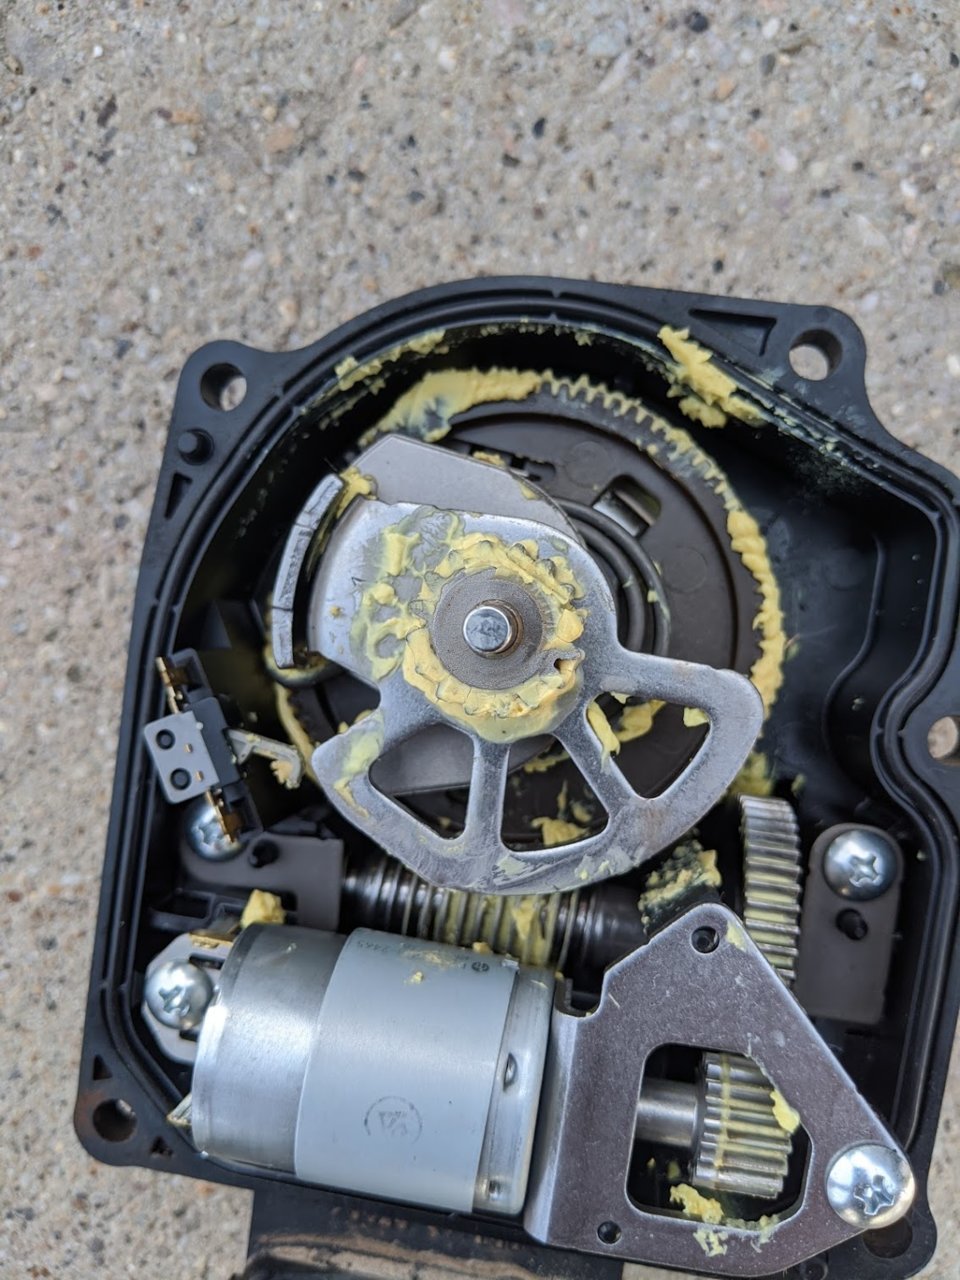 Could use some advice for Transfer Case Actuator replacement | Page 2